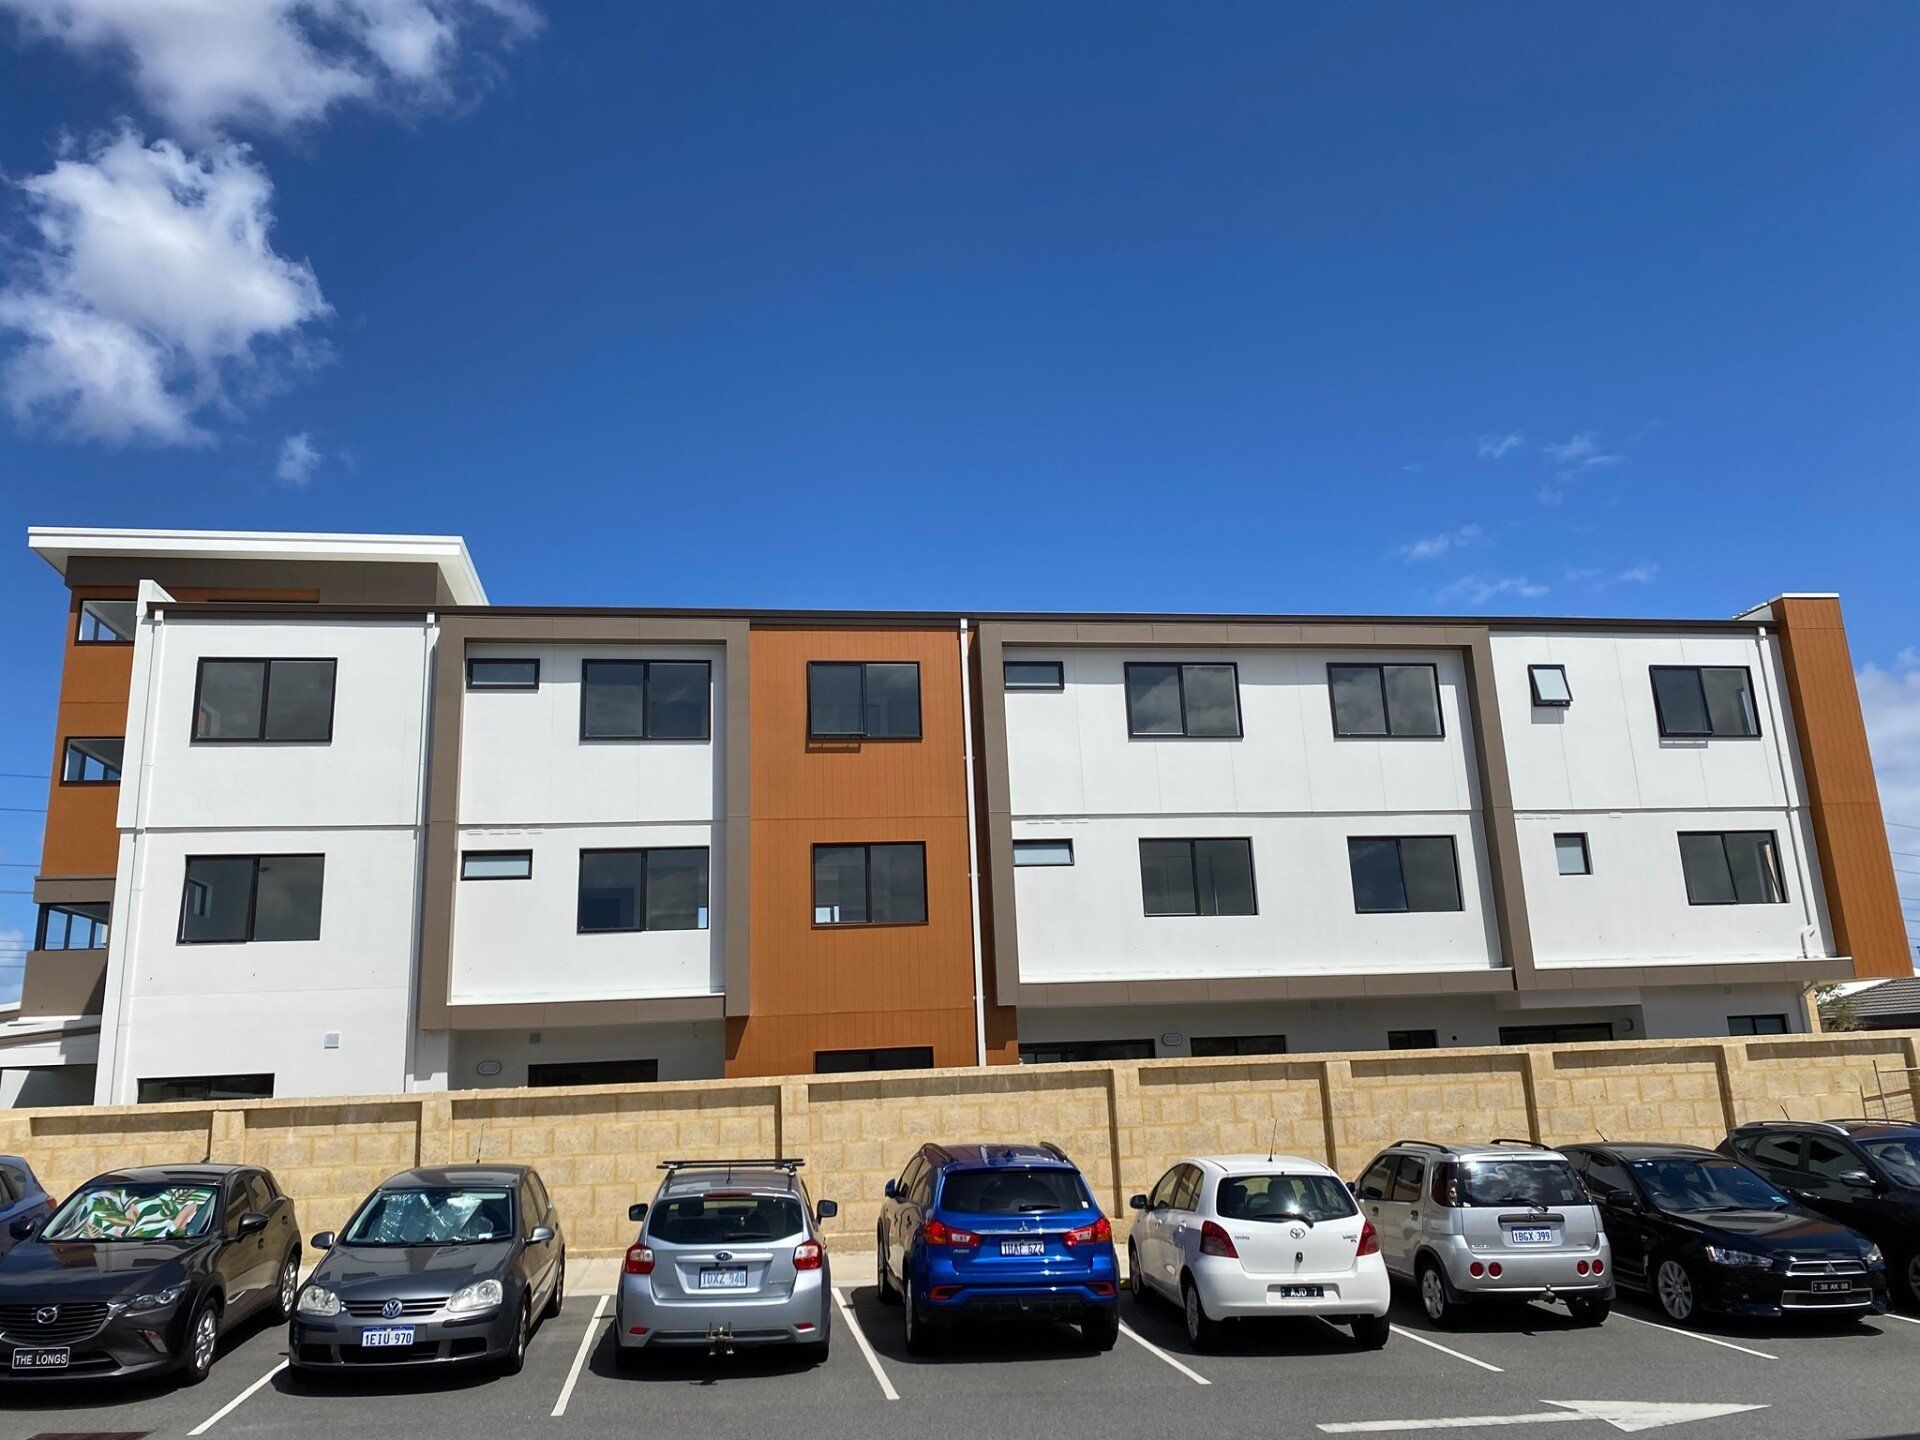 Apartment With Cars  - Canning Vale, WA - Accredit Building Surveying & Construction Services Pty Ltd